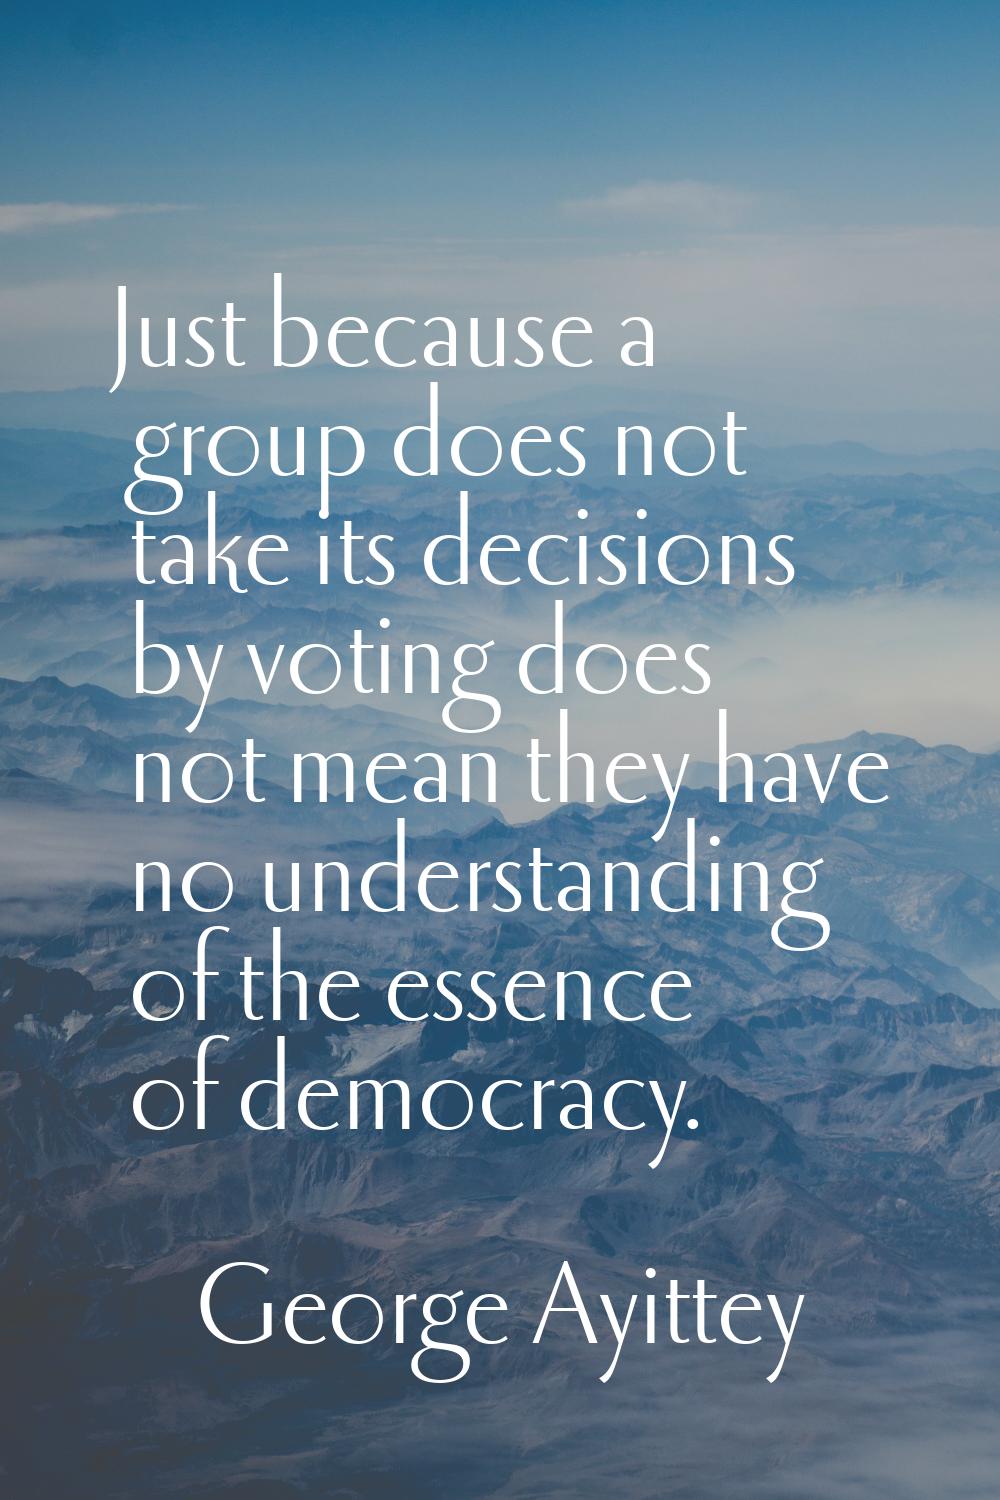 Just because a group does not take its decisions by voting does not mean they have no understanding